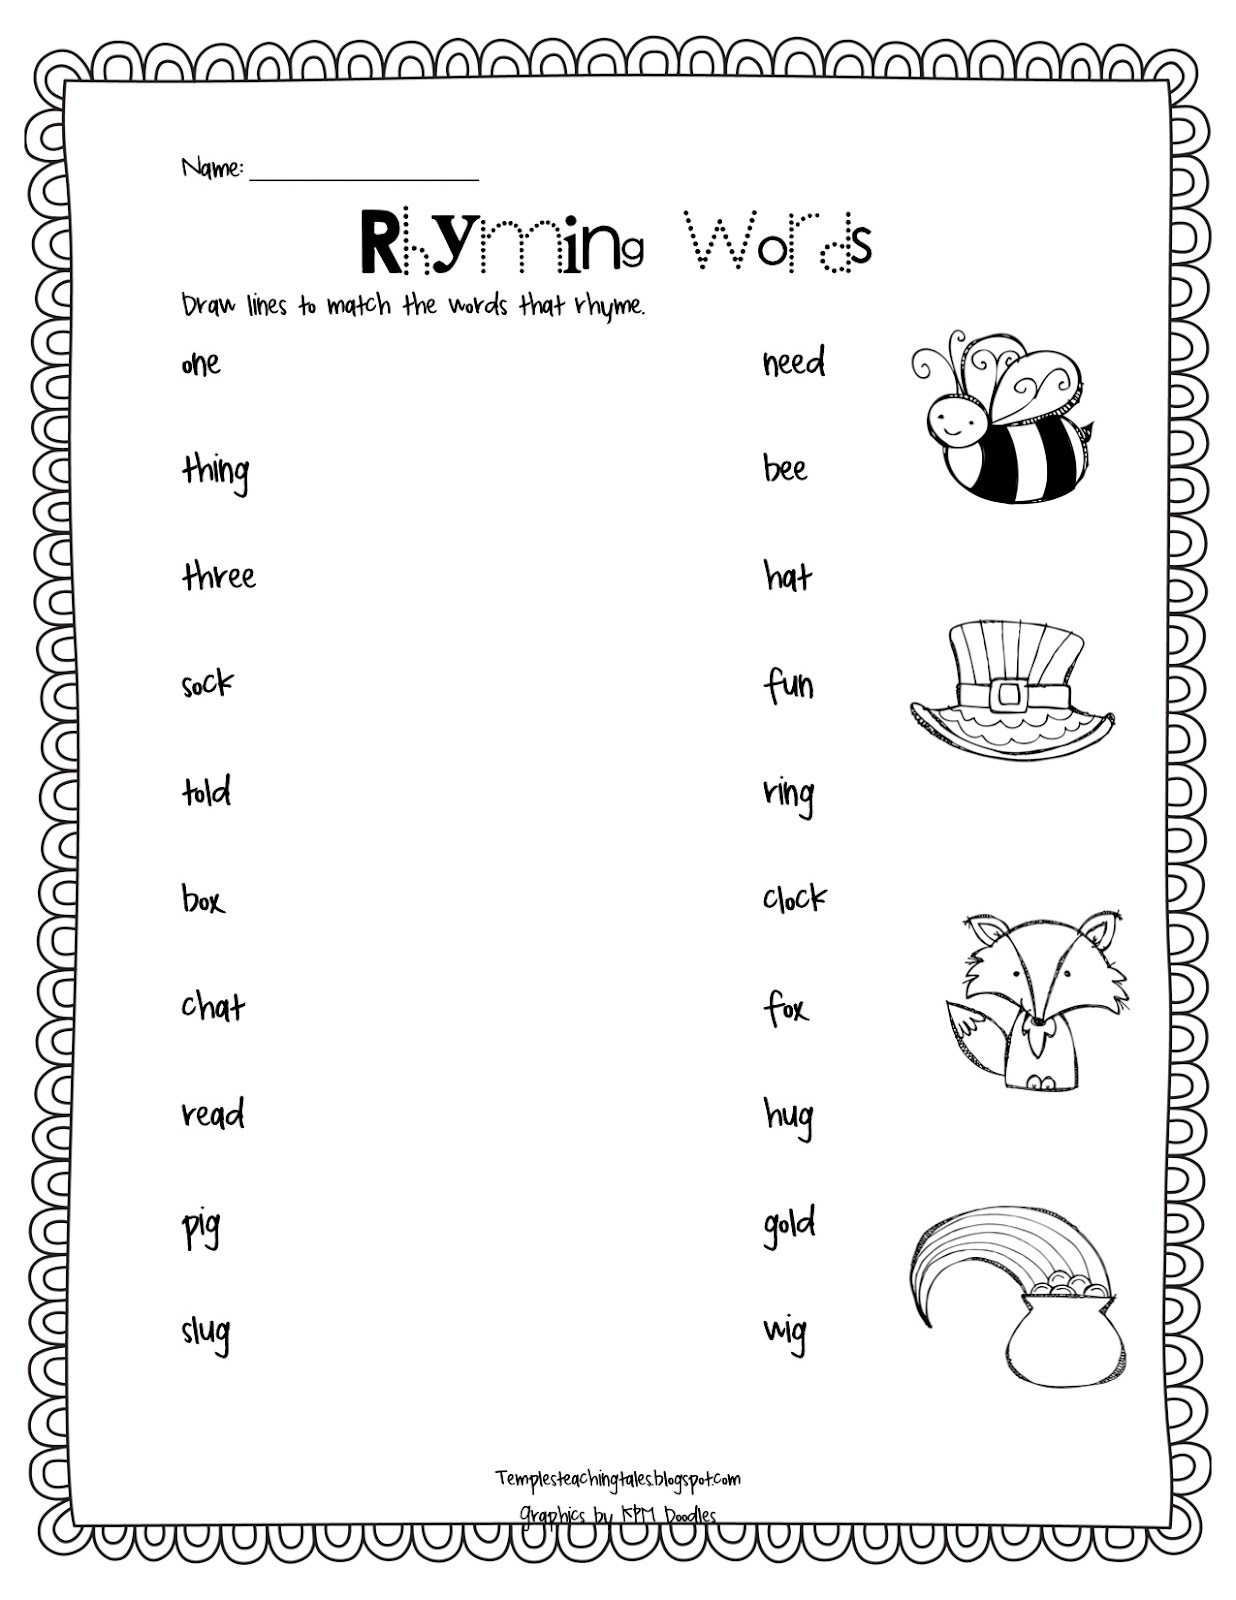 temple-s-teaching-tales-above-and-below-freebie-and-rhyming-words